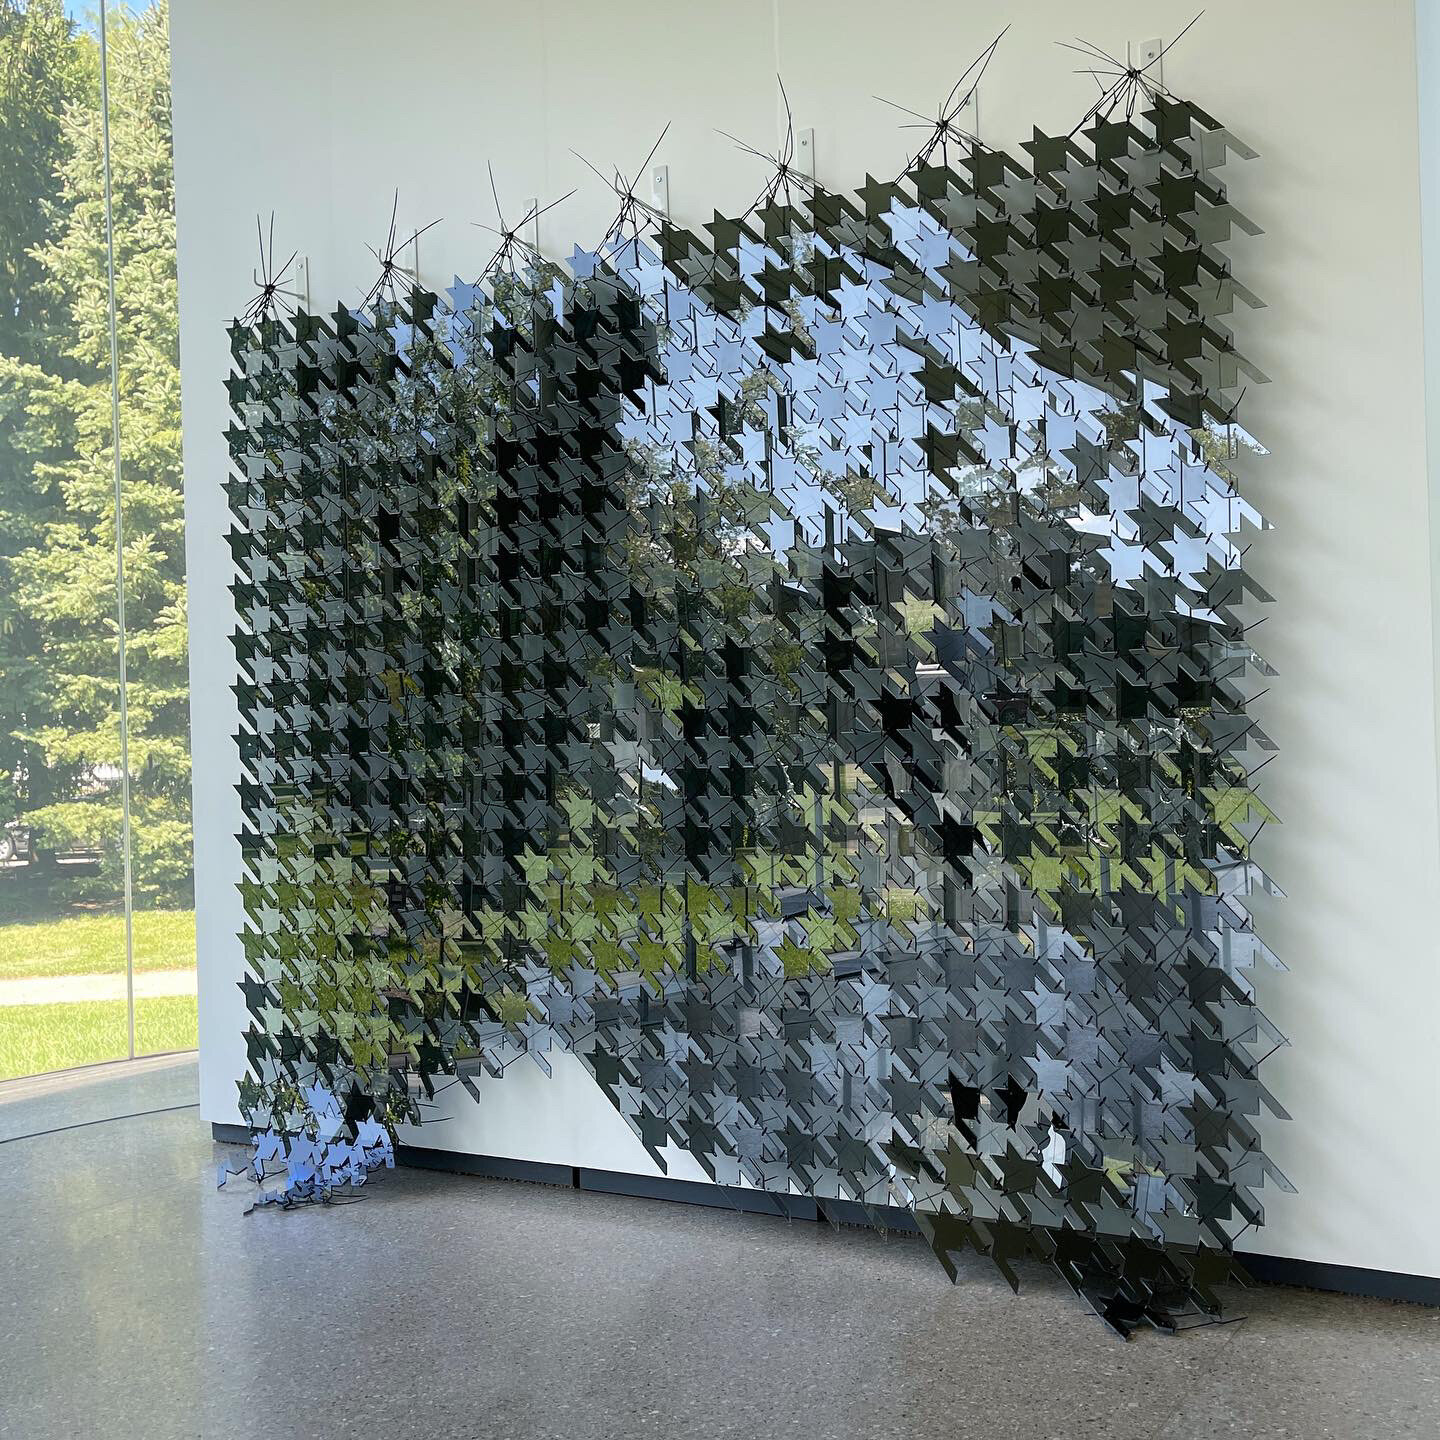   Cloak,  water jet cut glass, zip ties, 9’ x 8’  Shown here @ the Toledo Museum of Art  Collection of the Corning Museum of Glass 